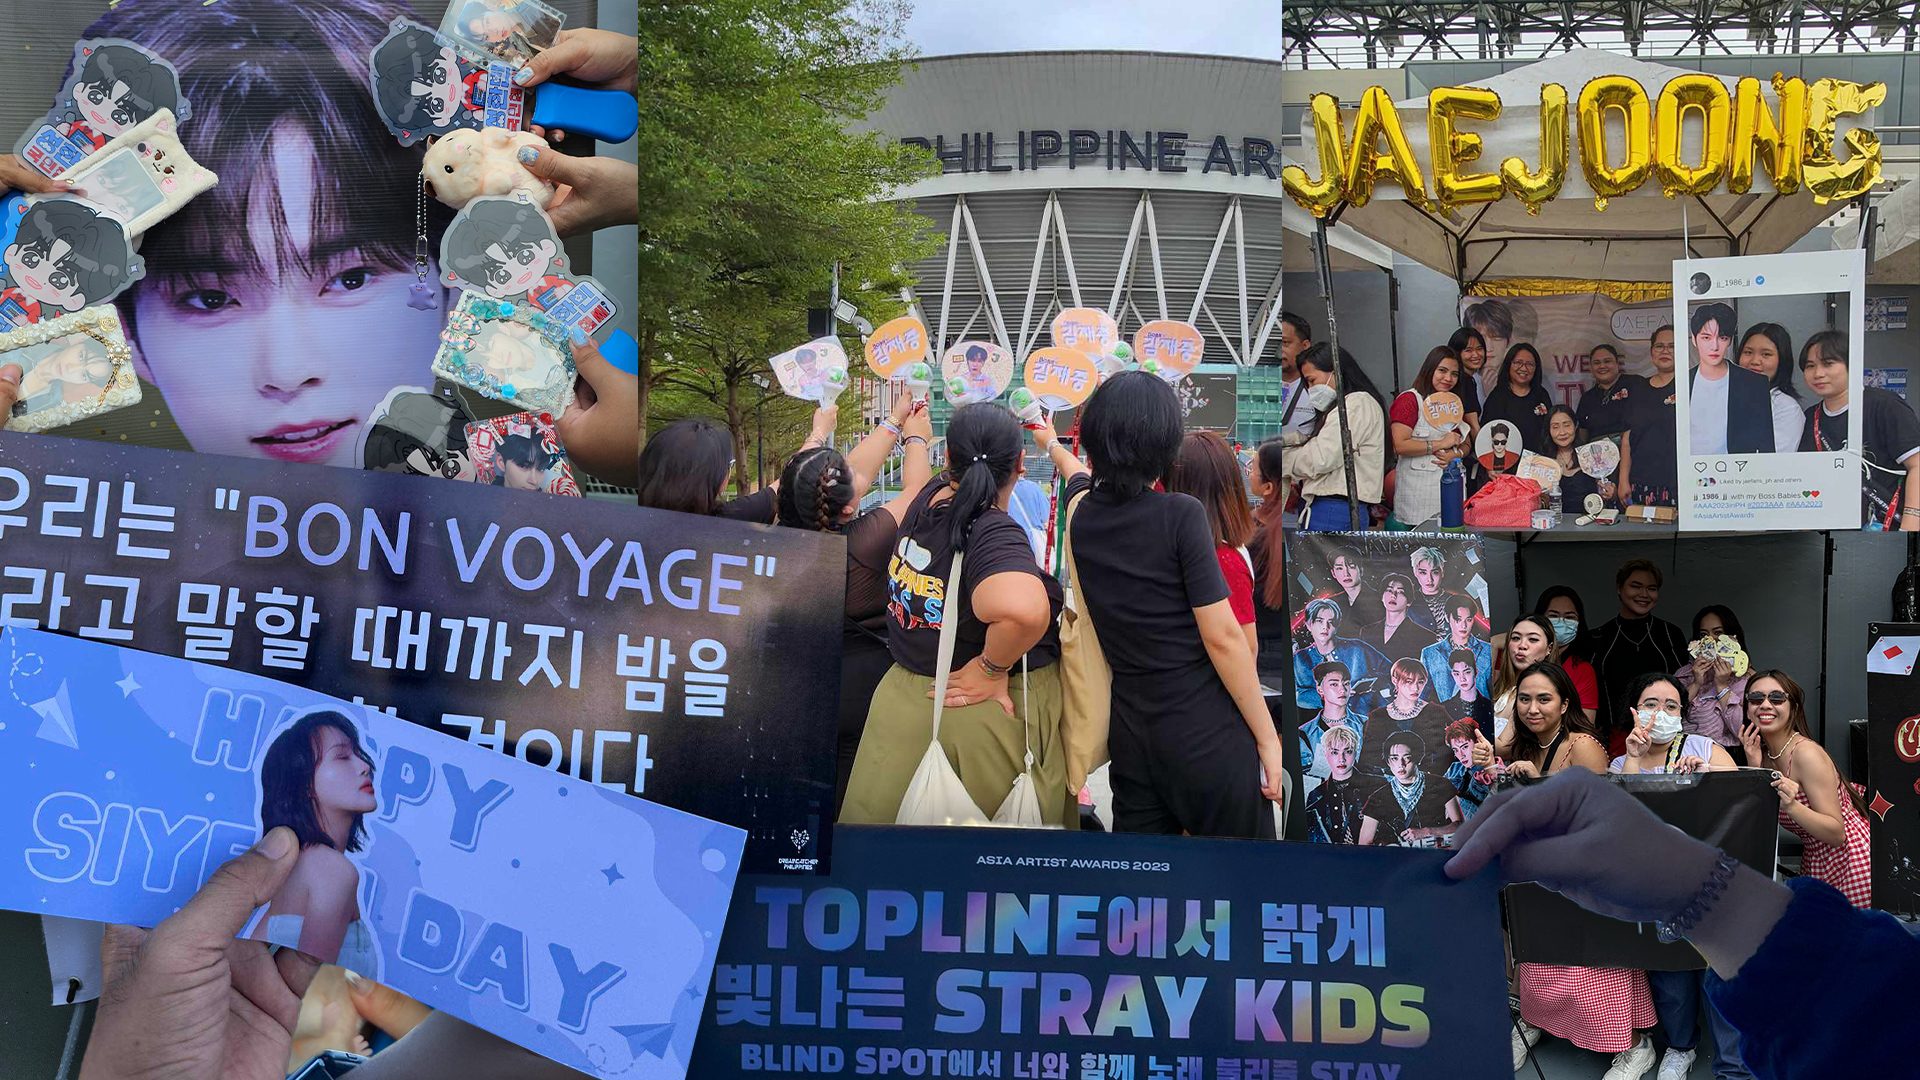 Fandoms unite: How Filipino Hallyu fans came together for AAA 2023